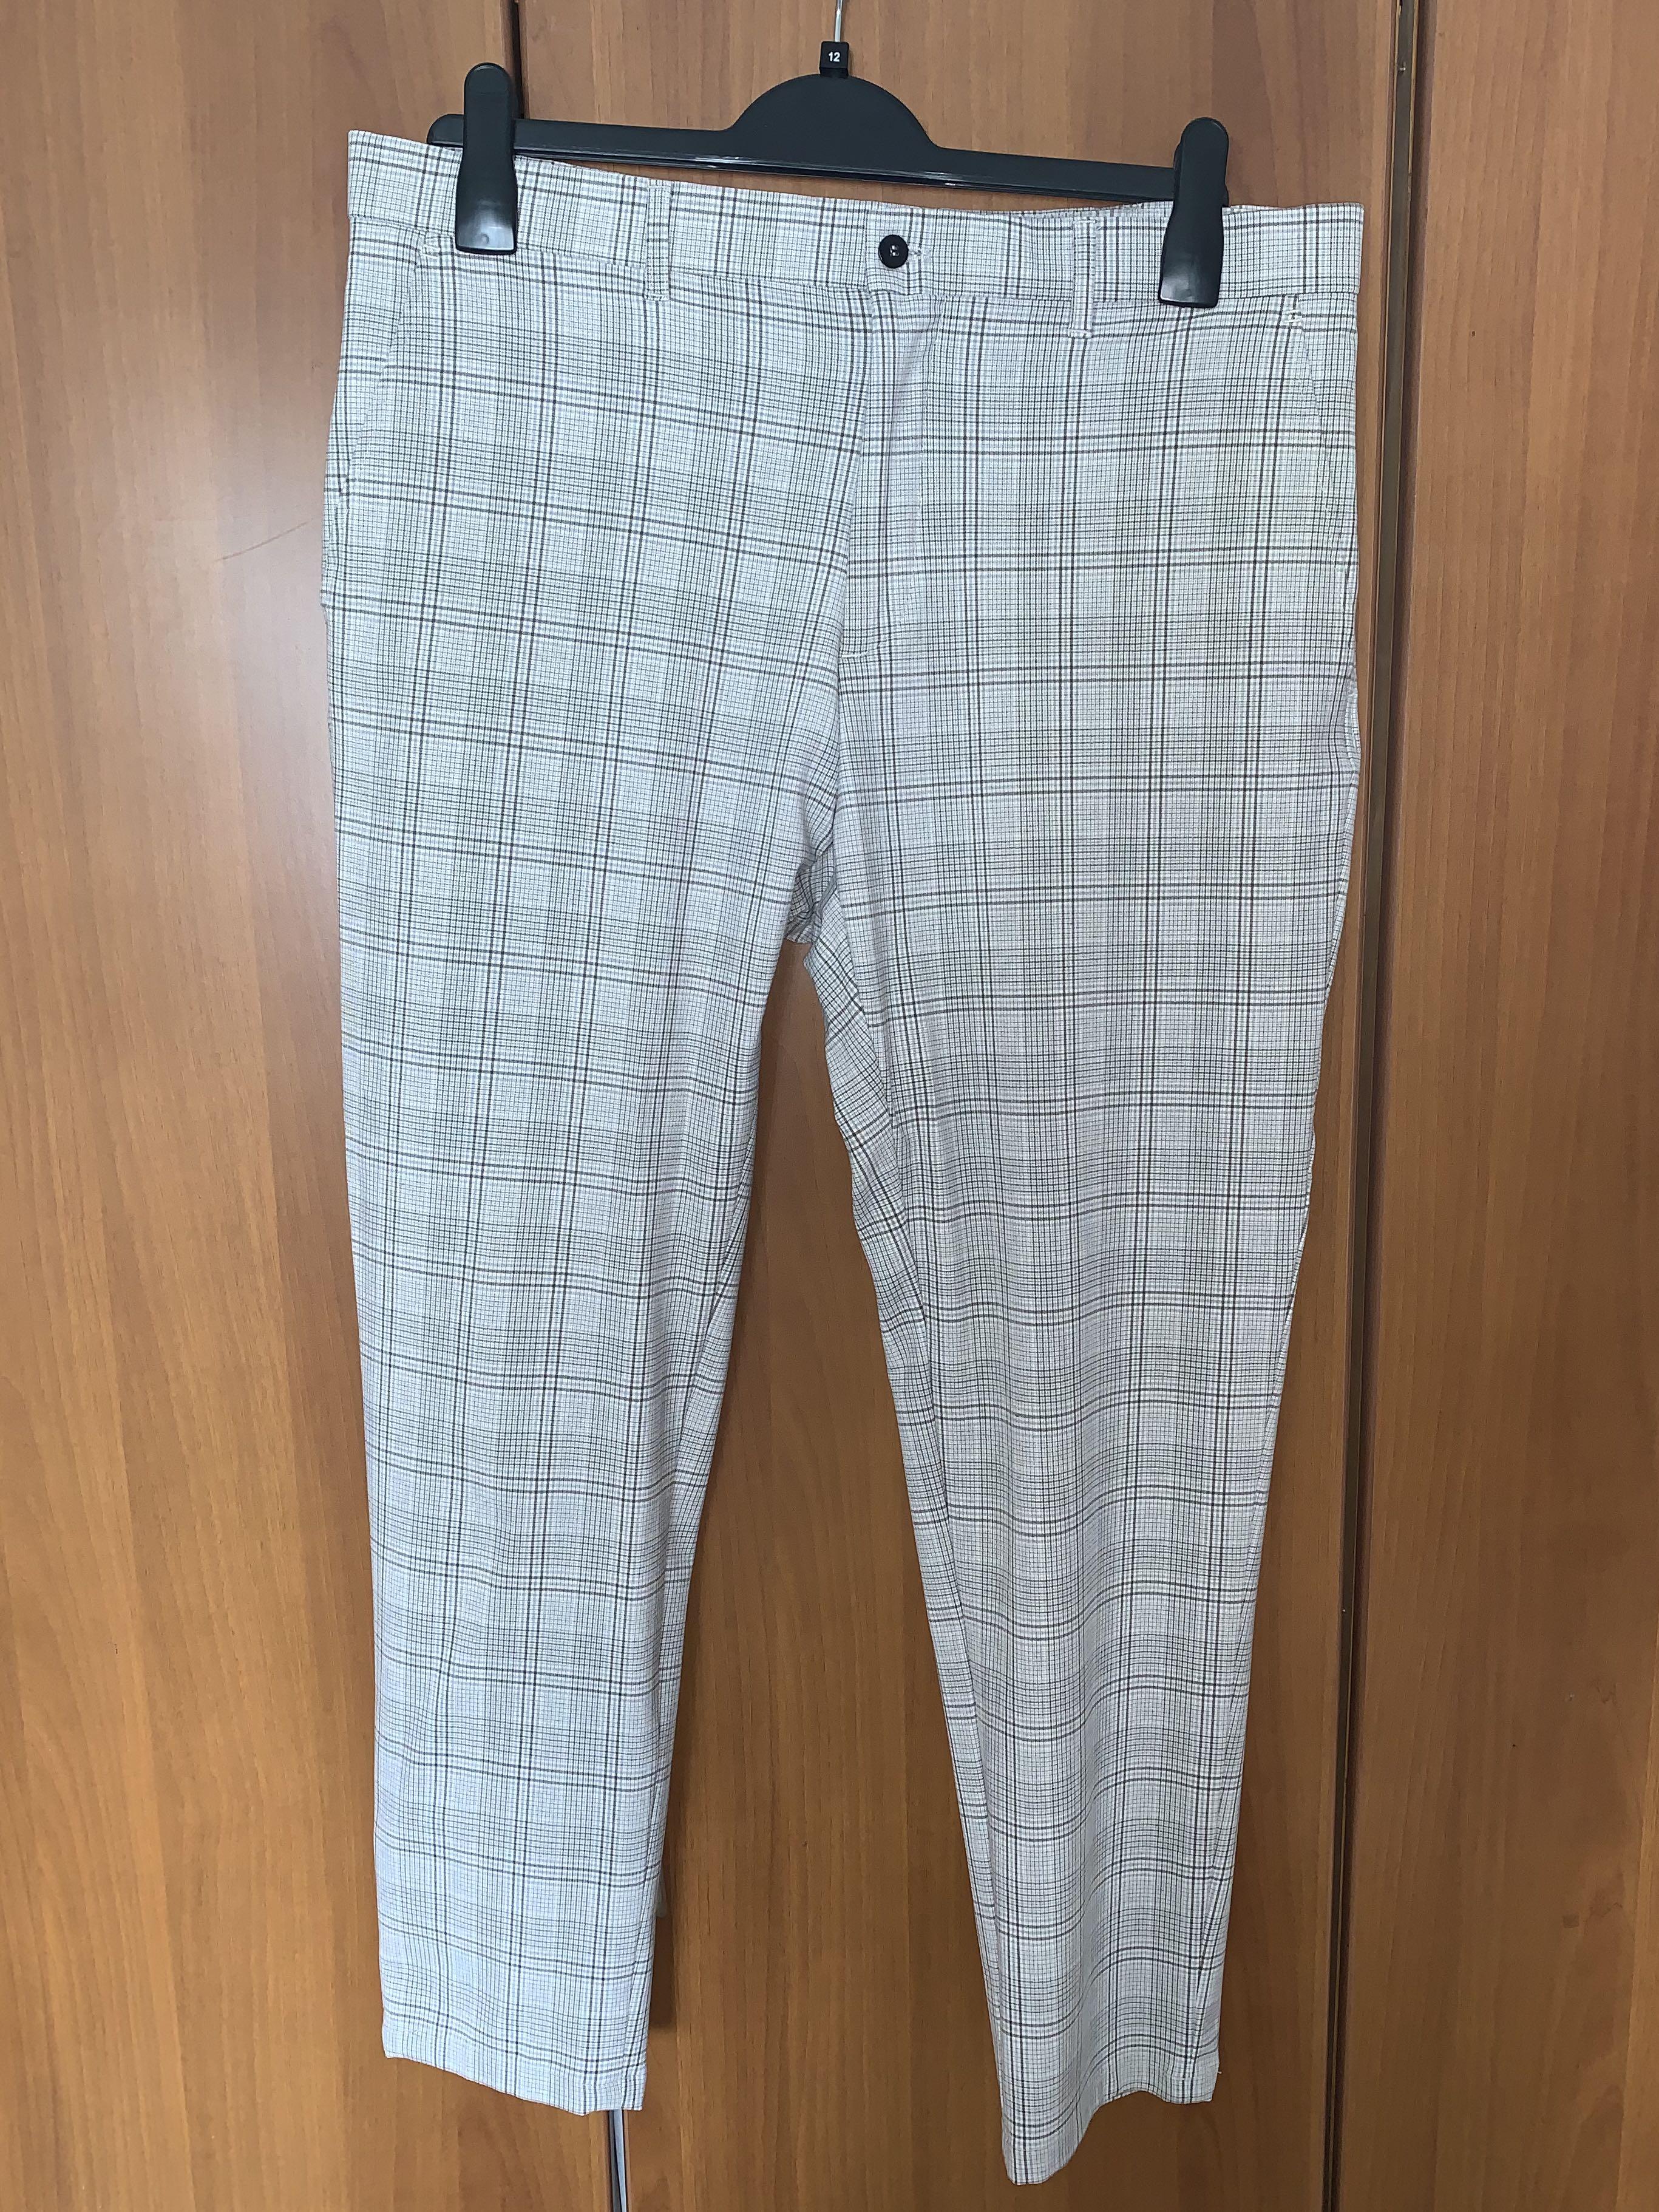 Zara Red checked Trousers from Zara Trafaluc Collection Size S | Vinted